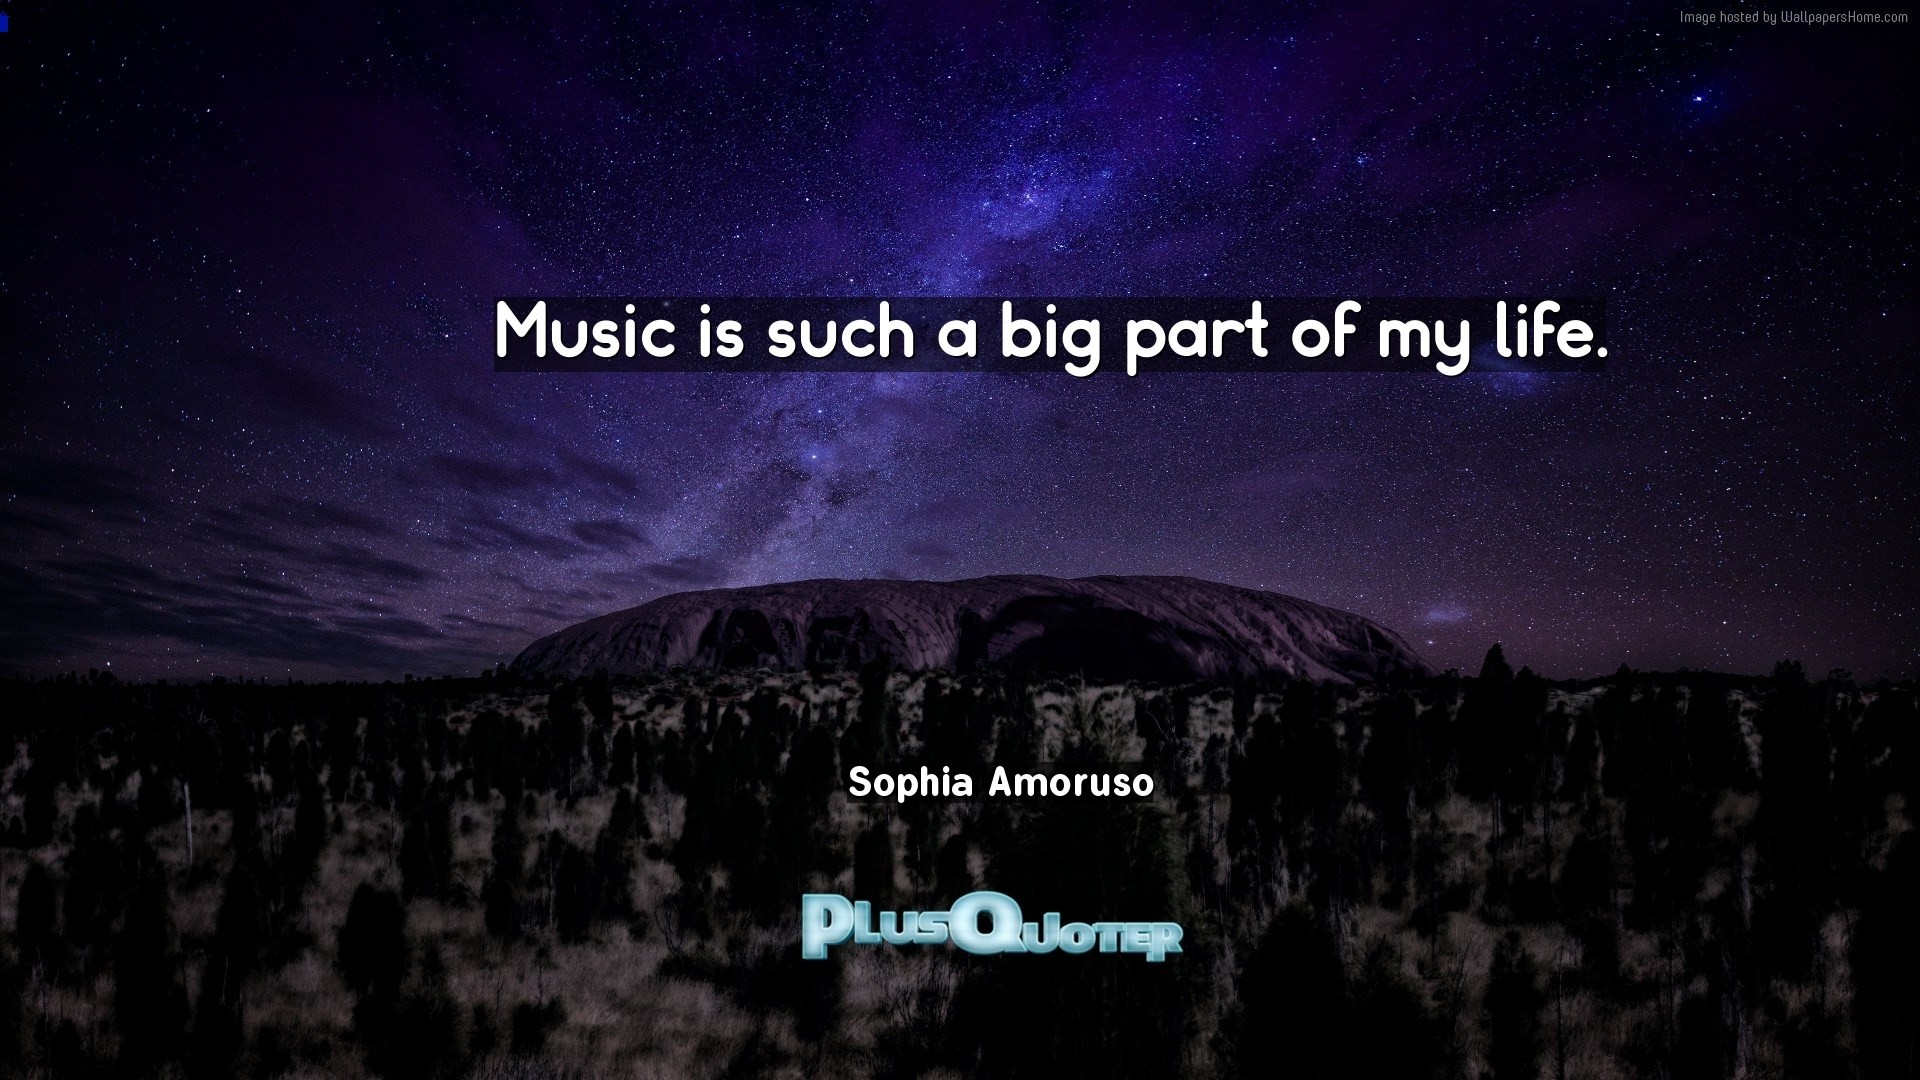 1920x1080 Download Wallpaper with inspirational Quotes- "Music is such a big part of my  life